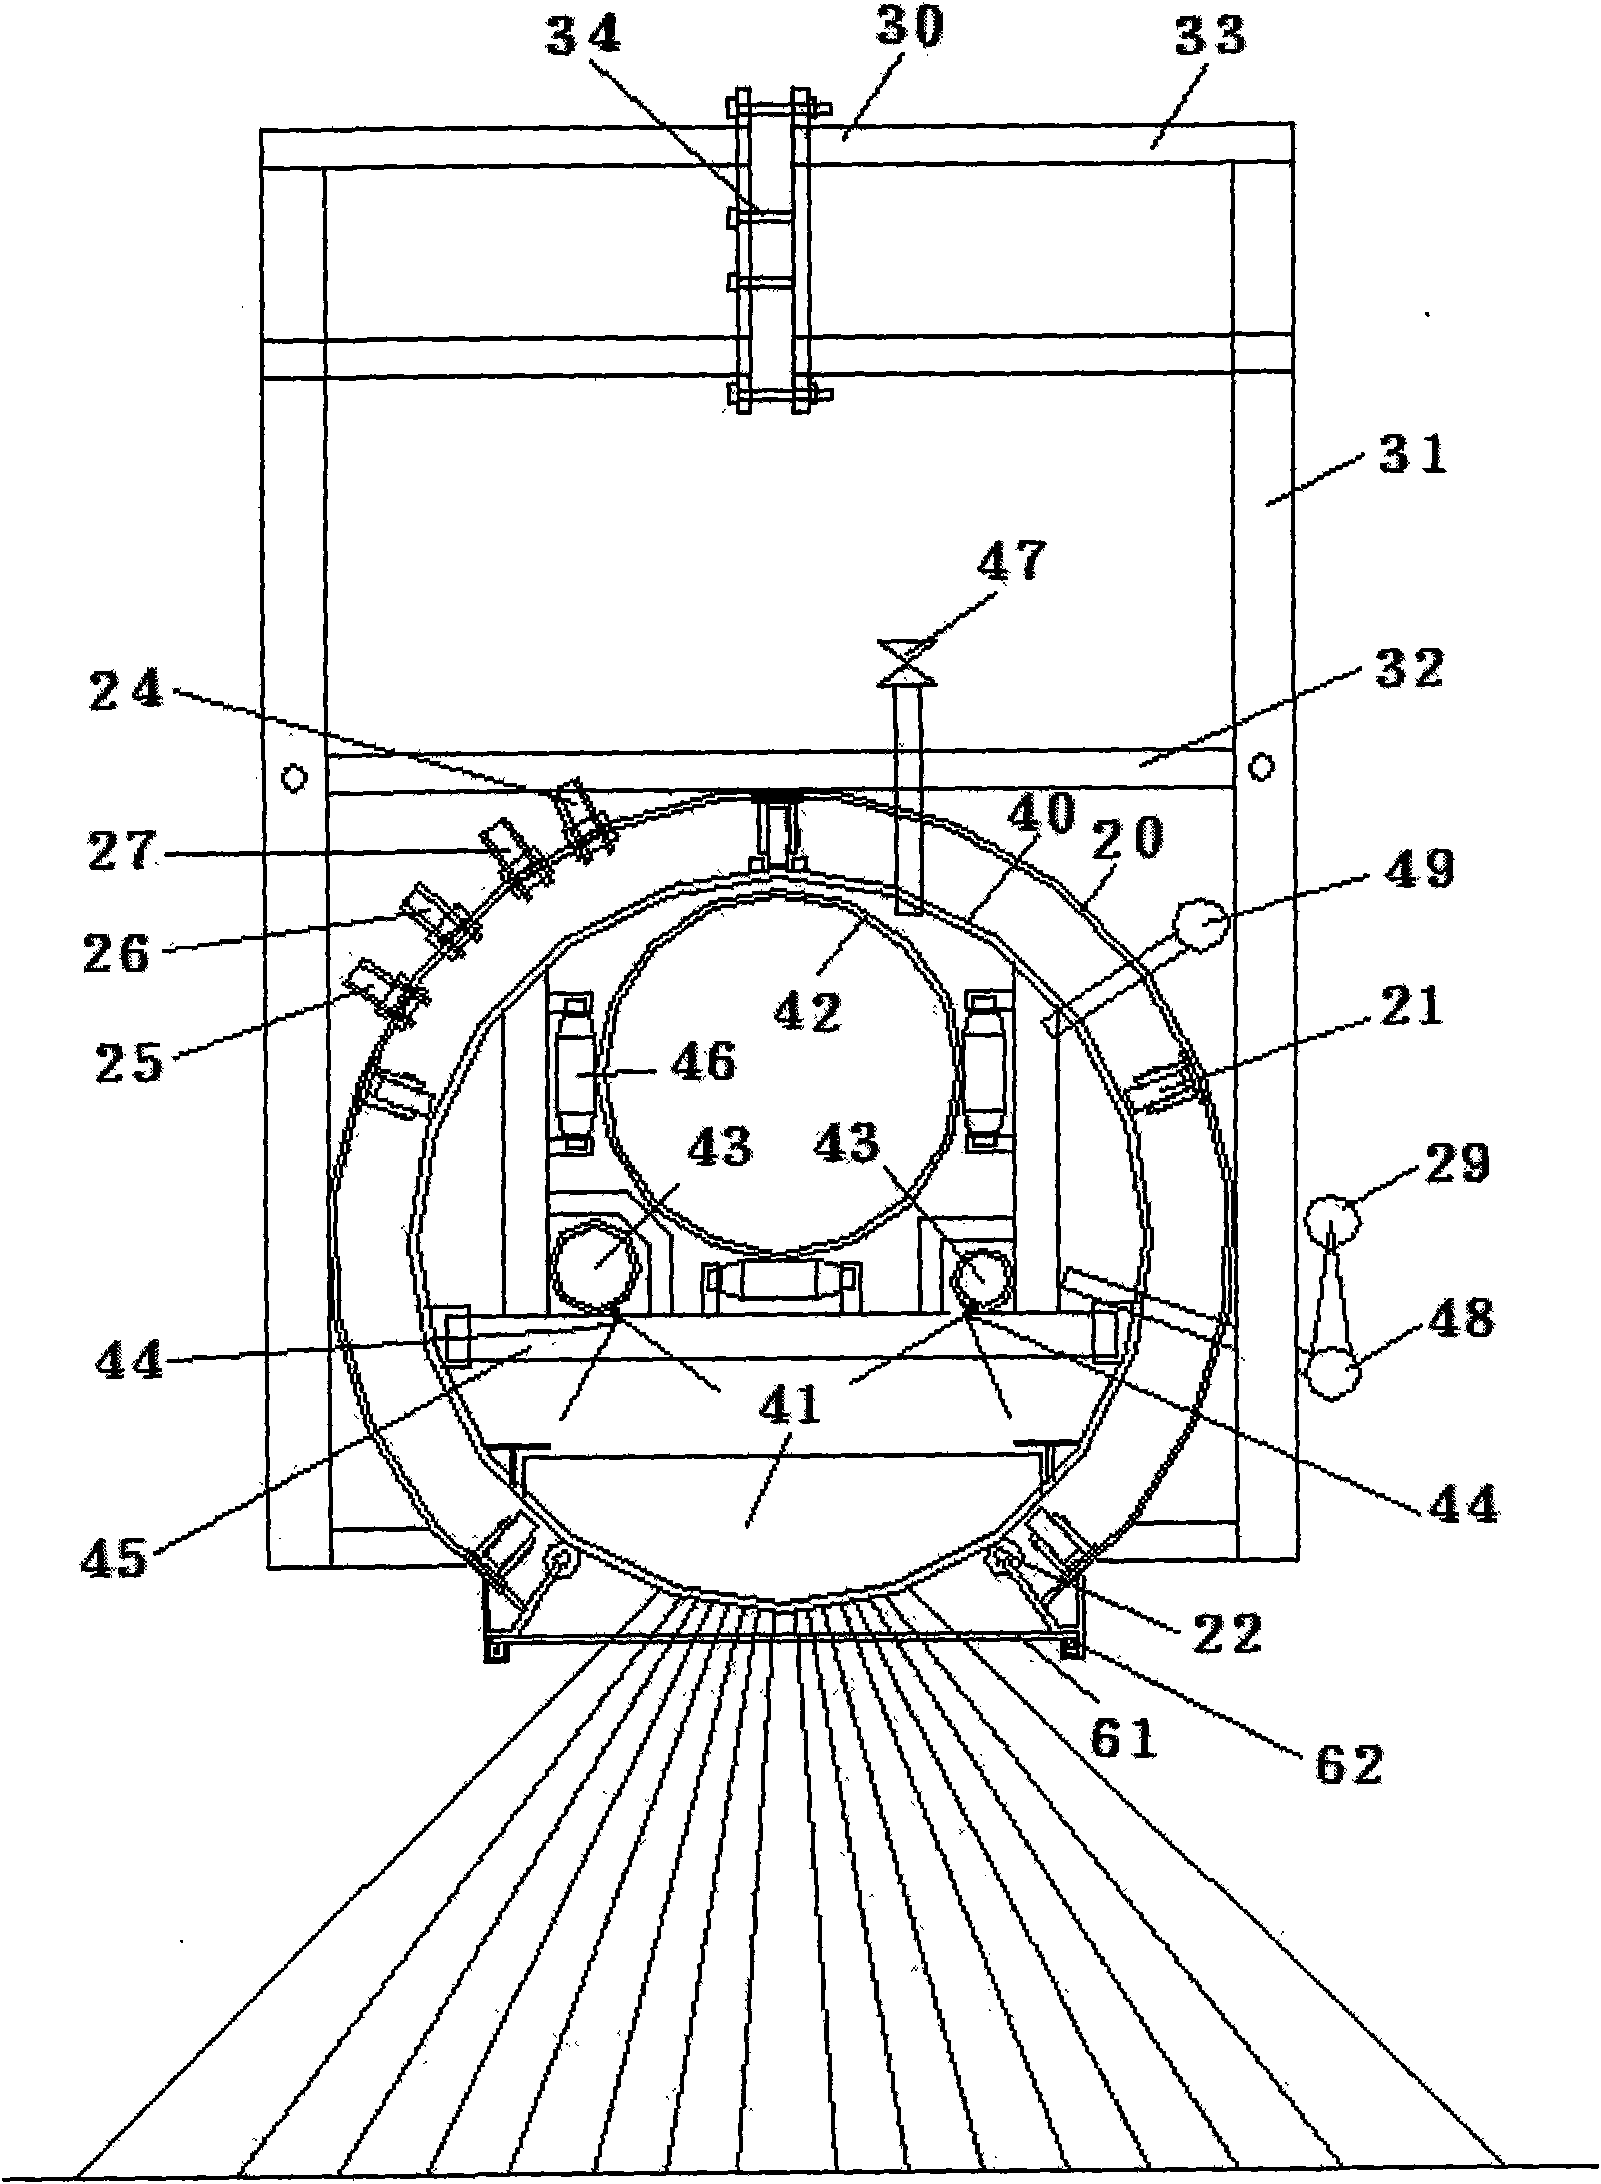 Composite working tube and solar energy steam-generating equipment